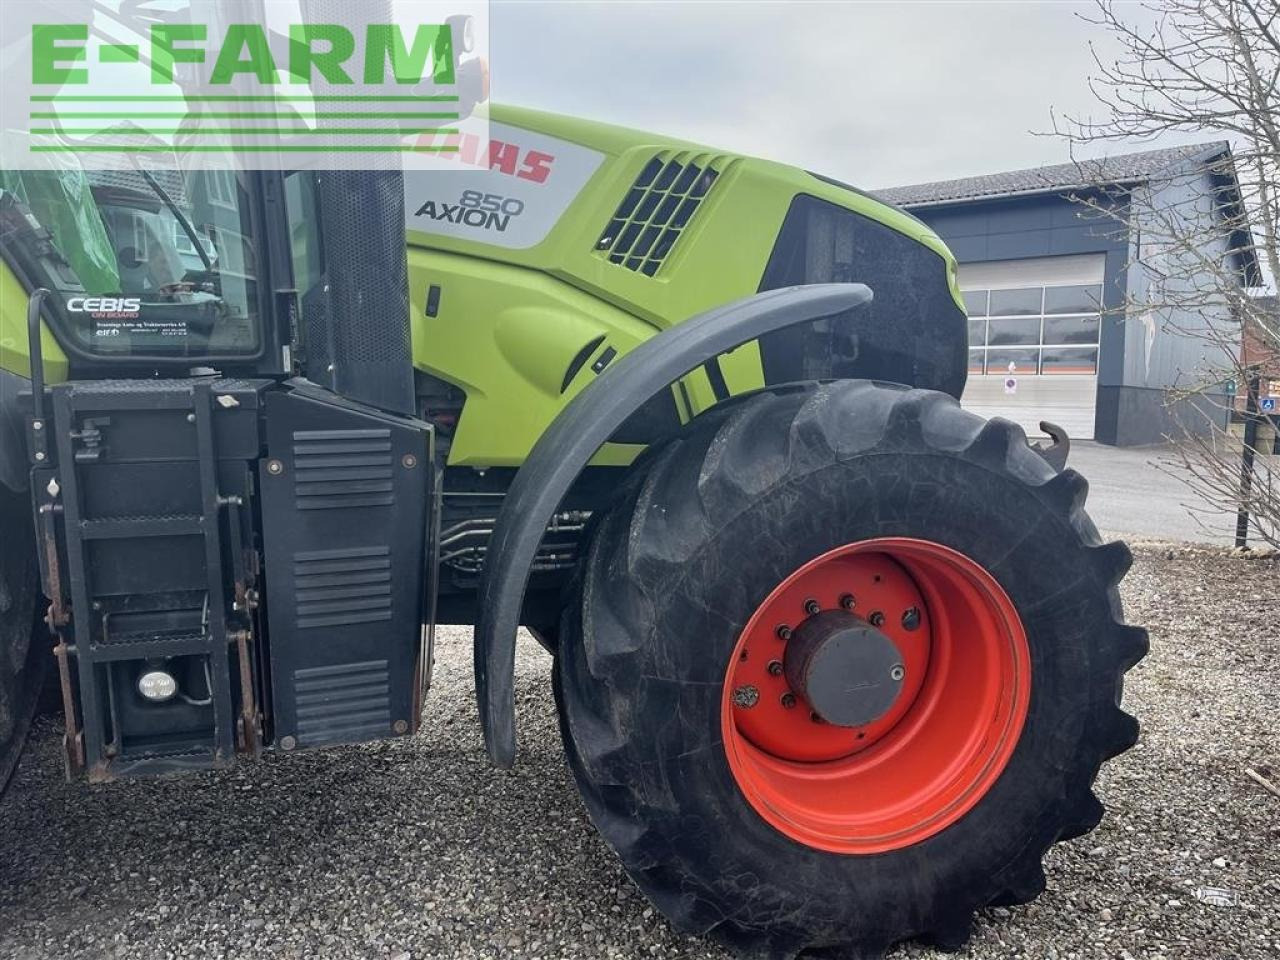 Tracteur agricole CLAAS axion 850 front pto & s10 gps